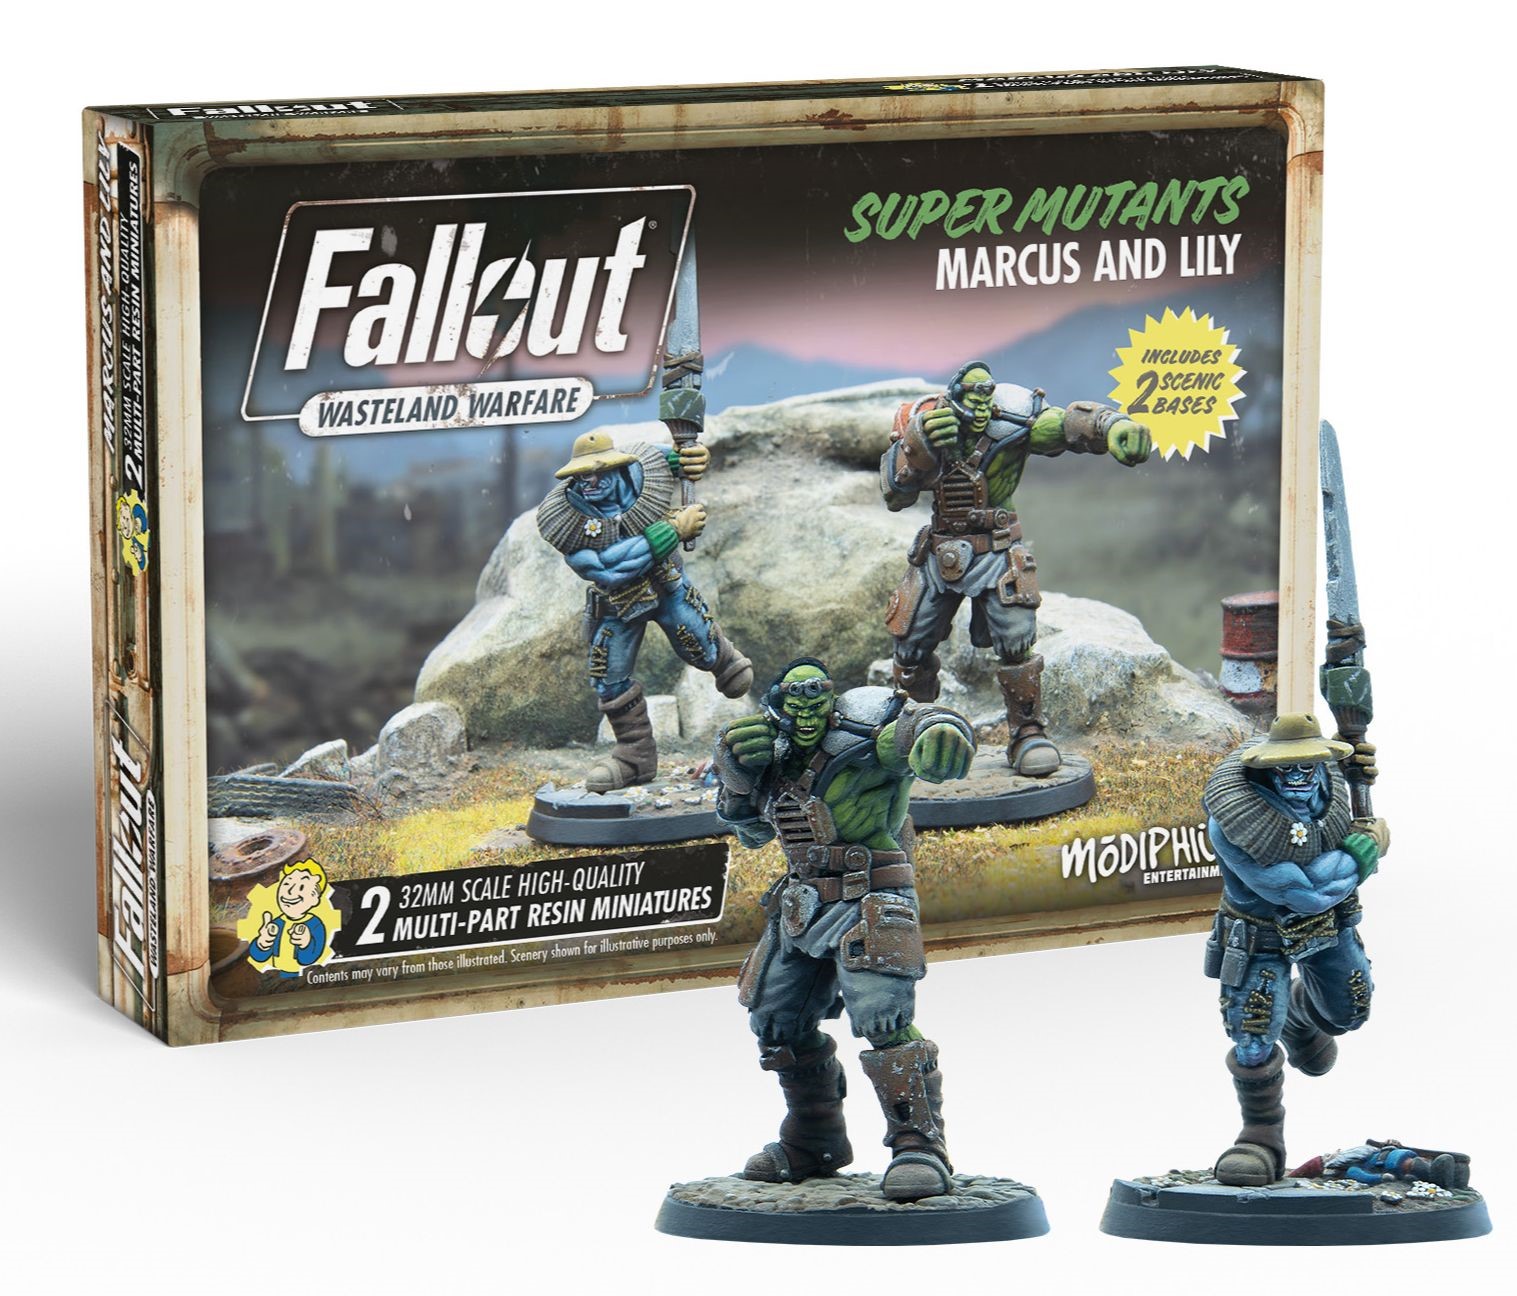 Fallout: Wasteland Warfare: Super Mutants Marcus and Lily 